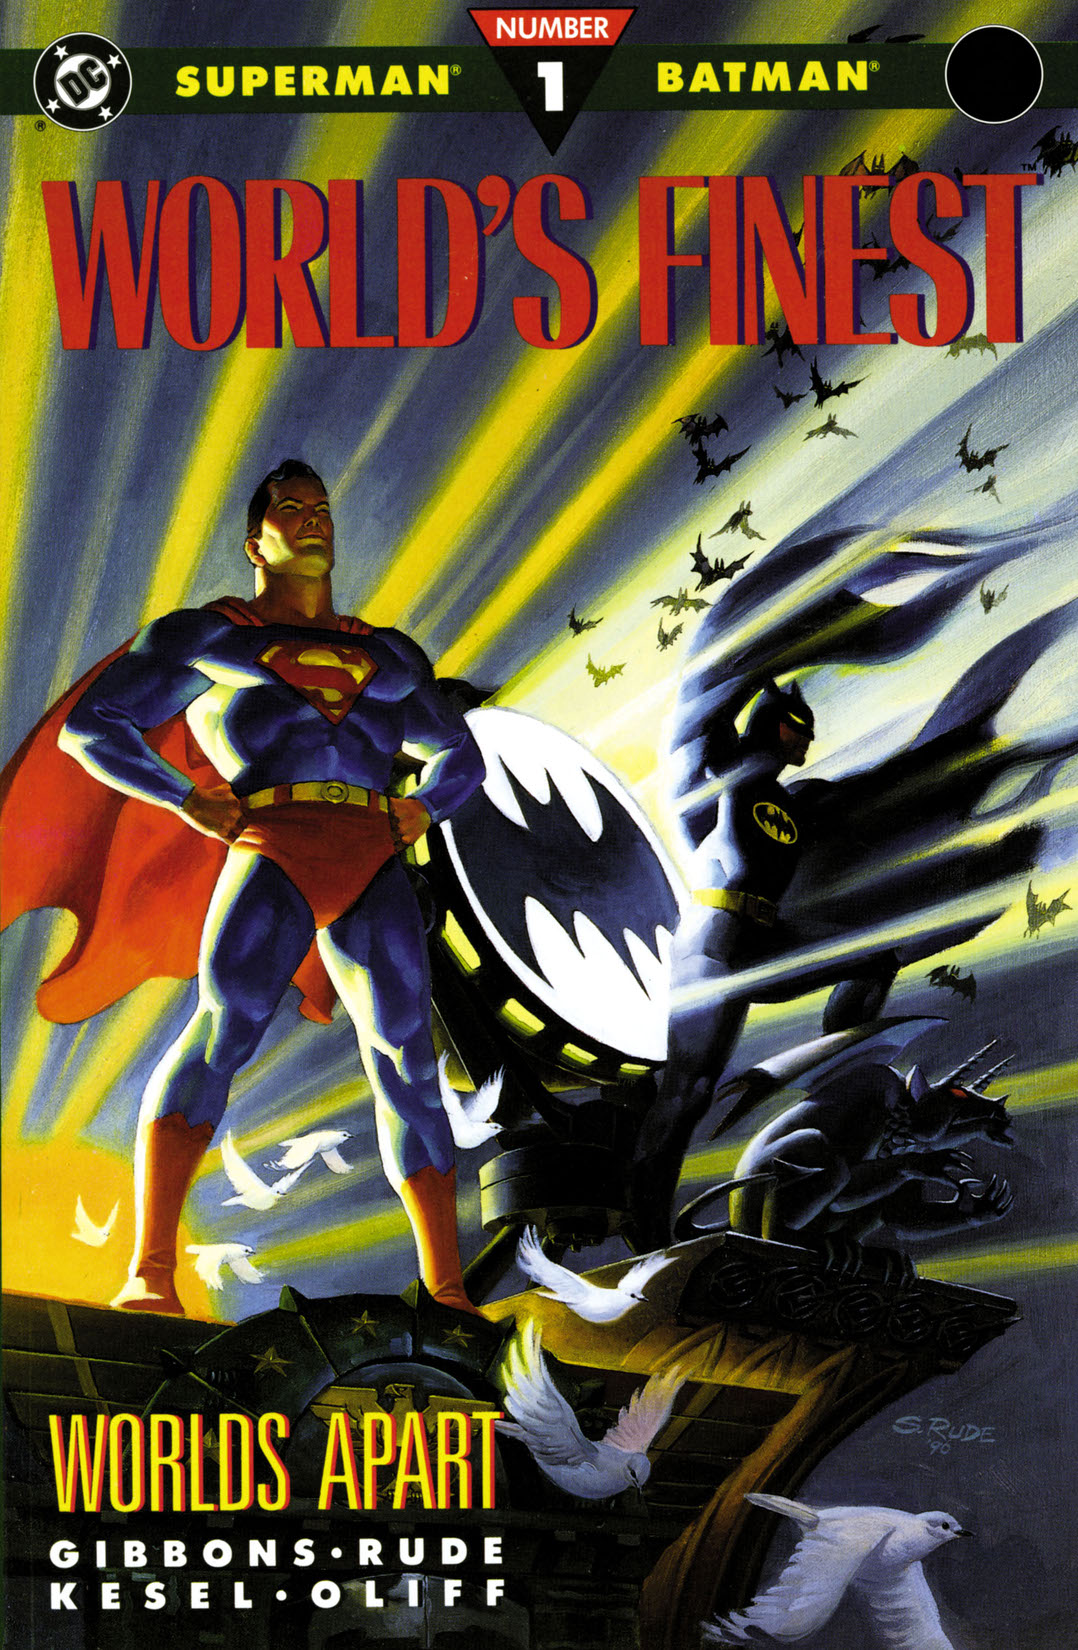 World's Finest (1990-) #1 preview images